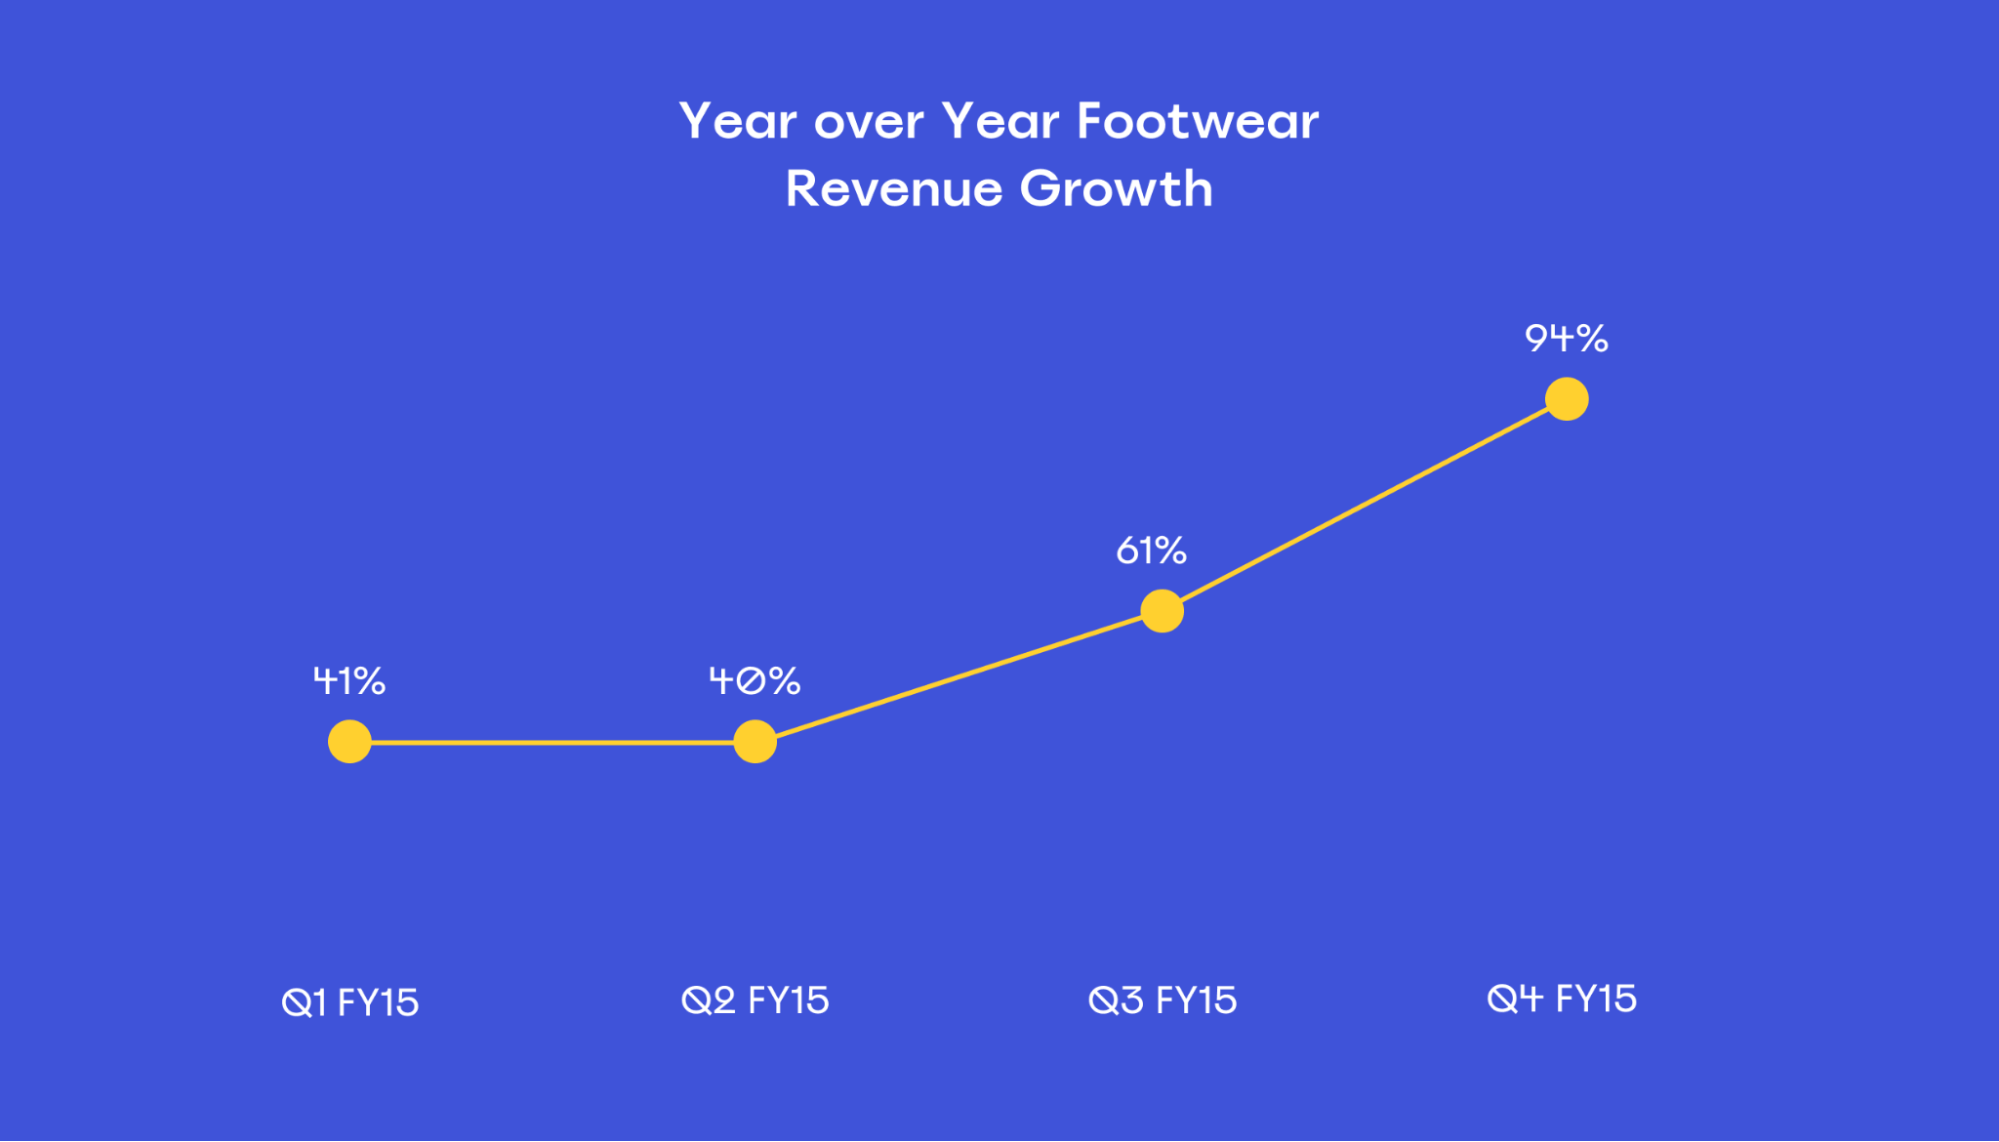 Line graph showing UnderArmour’s year on year revenue growth from footwear in 2015